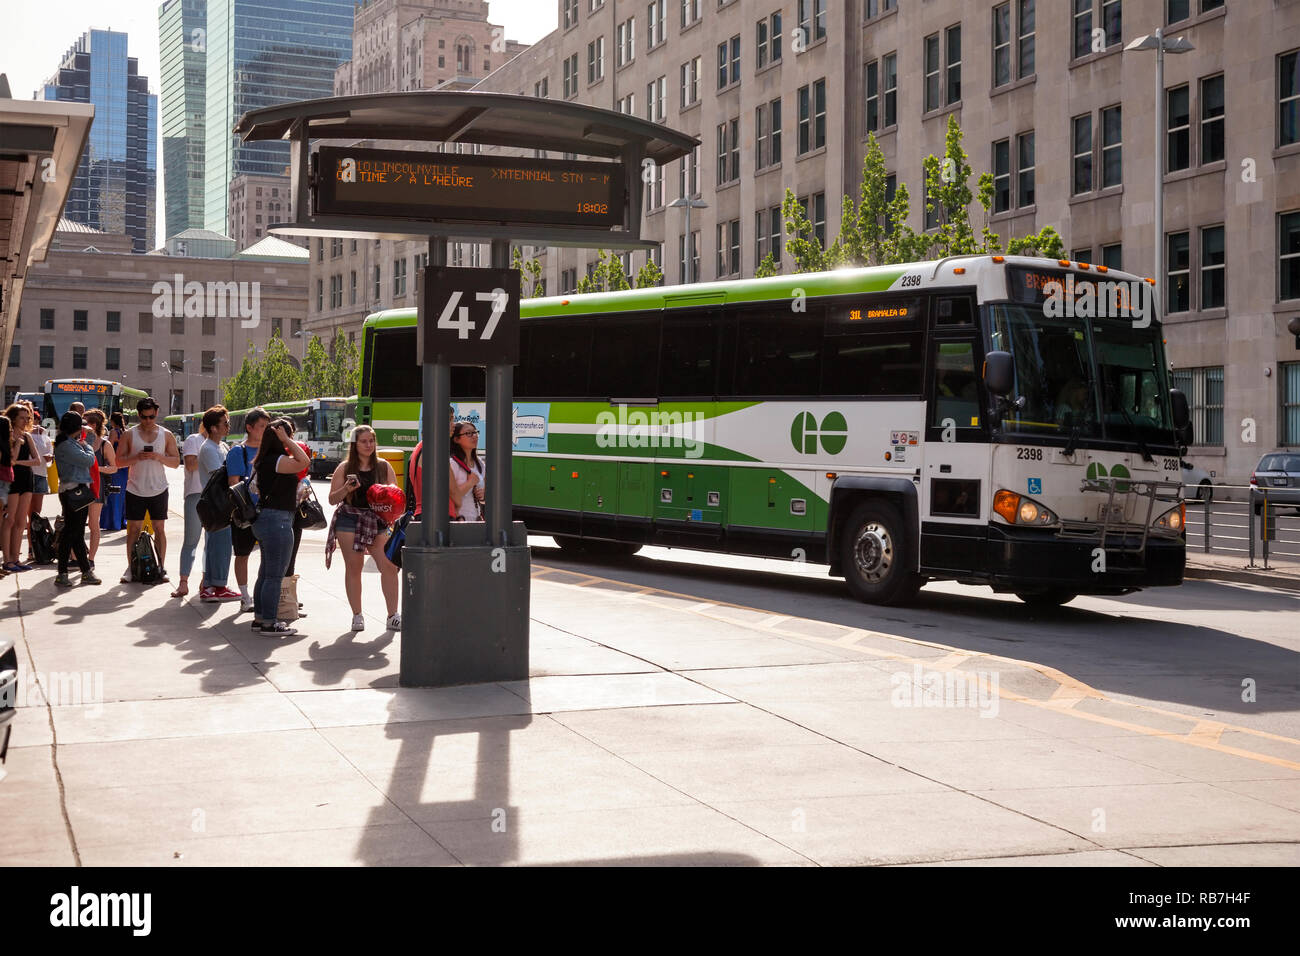 Go Buses At The Union Station Bus Terminal City Of Toronto Ontario Canada RB7H4F 